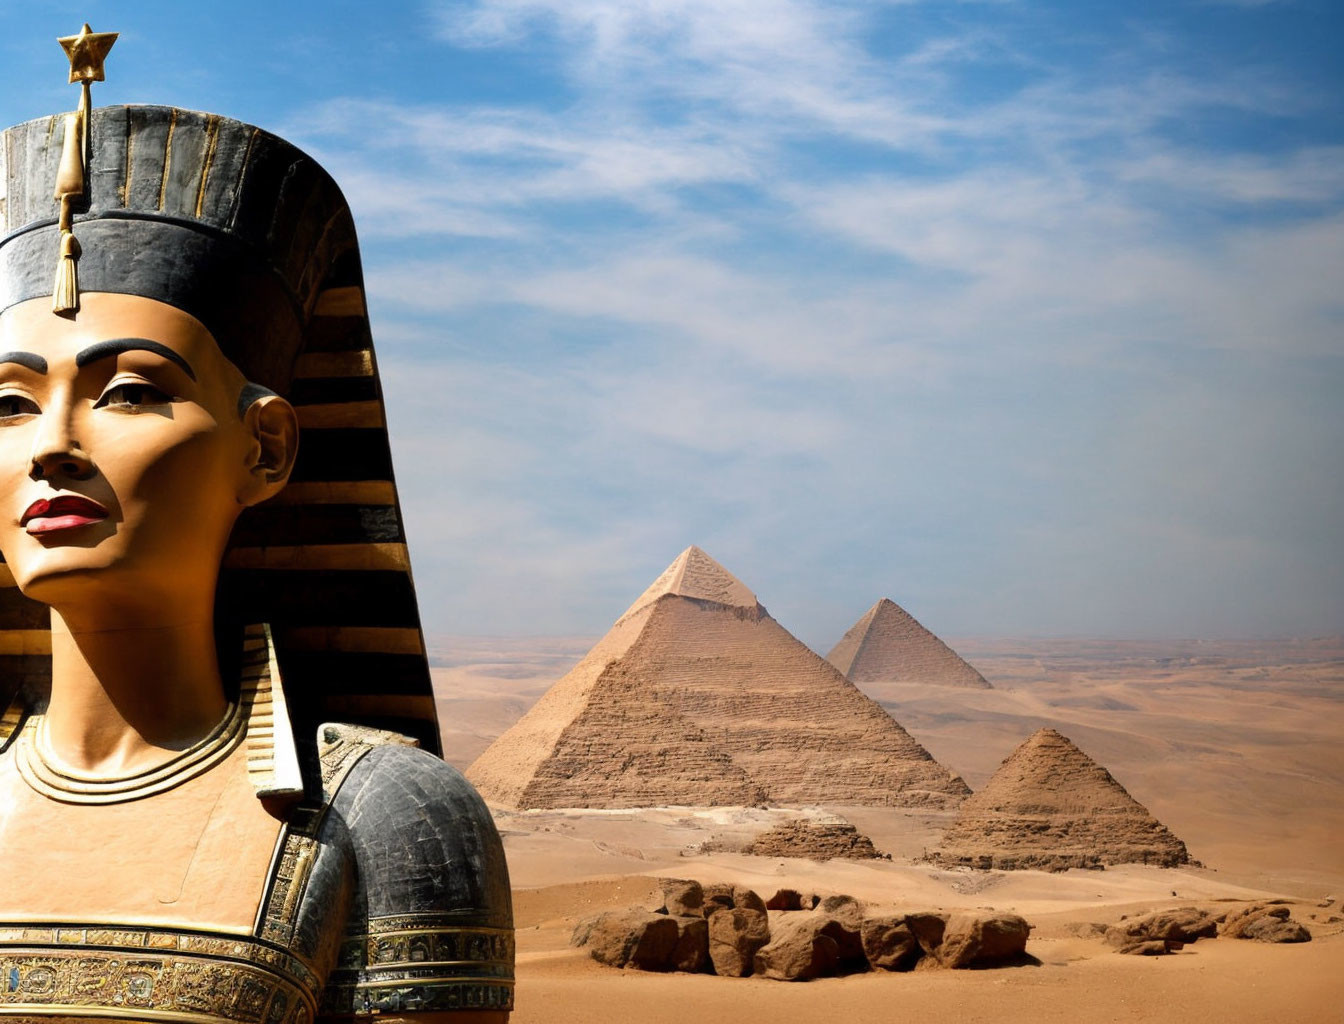 Ancient Egyptian statue with headdress and Great Pyramids of Giza.